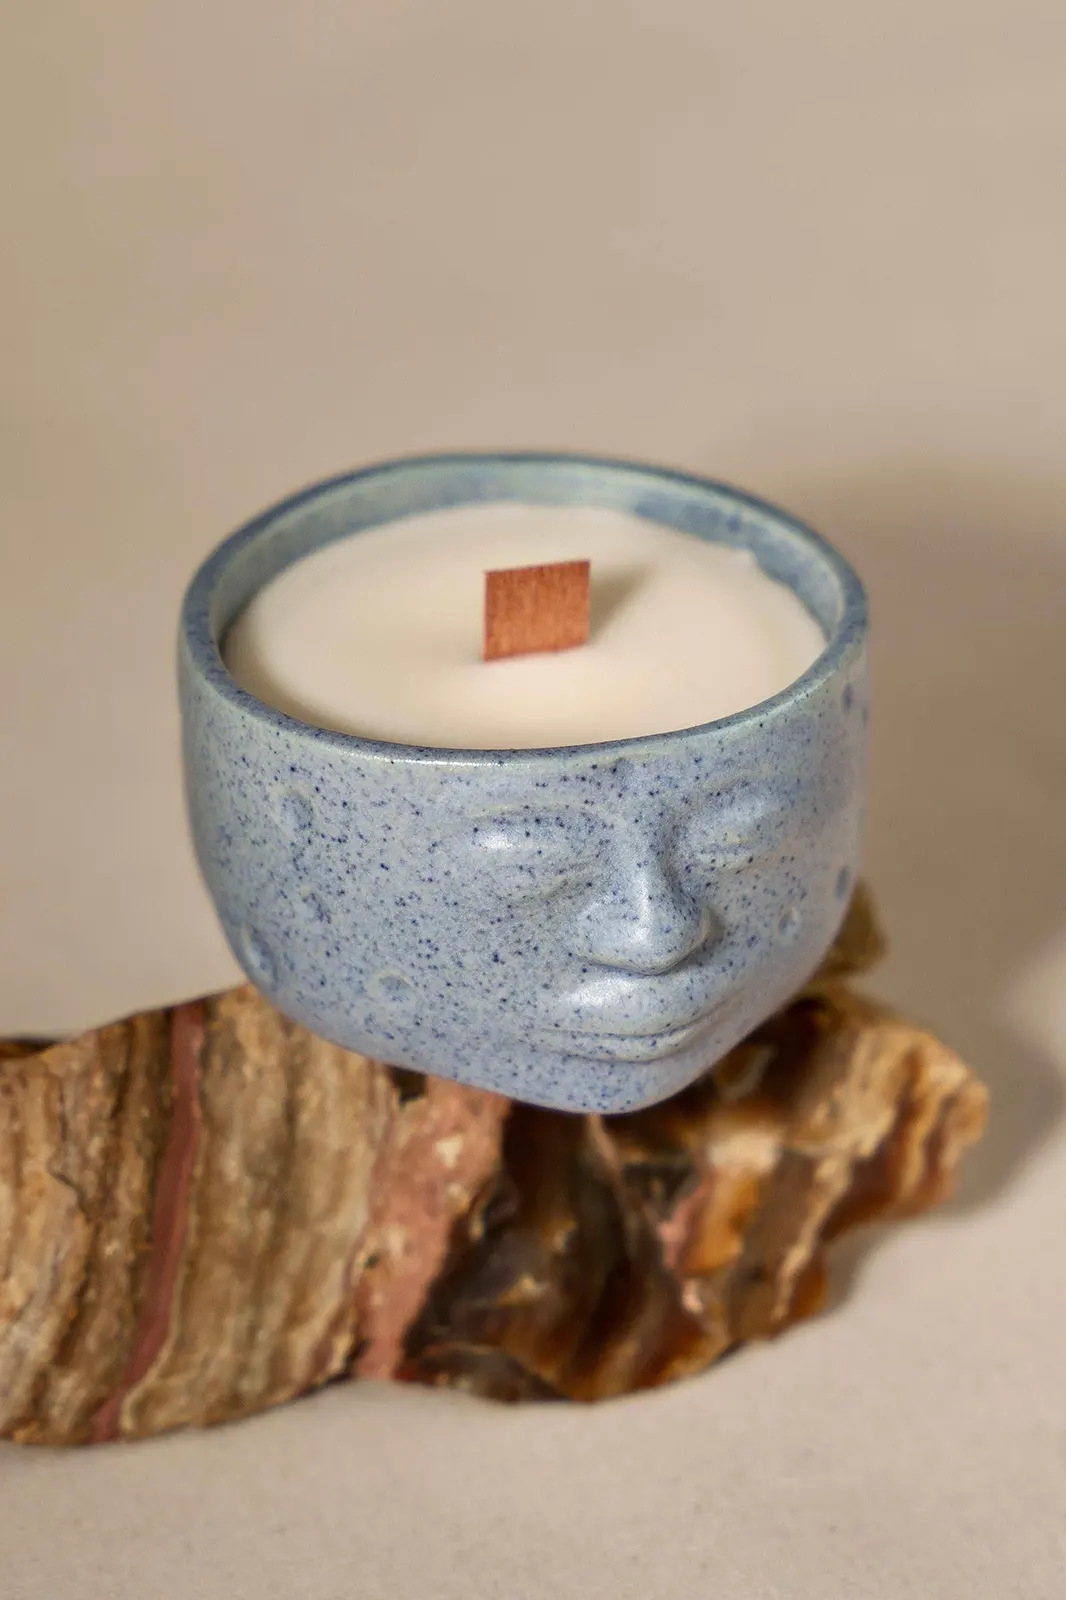 Martian jar candle fragrance free, fragrance free candle, ceramic jar candle, jar candle, handmade candles, soy wax candle, wax candles, candles, natural candle, Toh, Sepia Stories